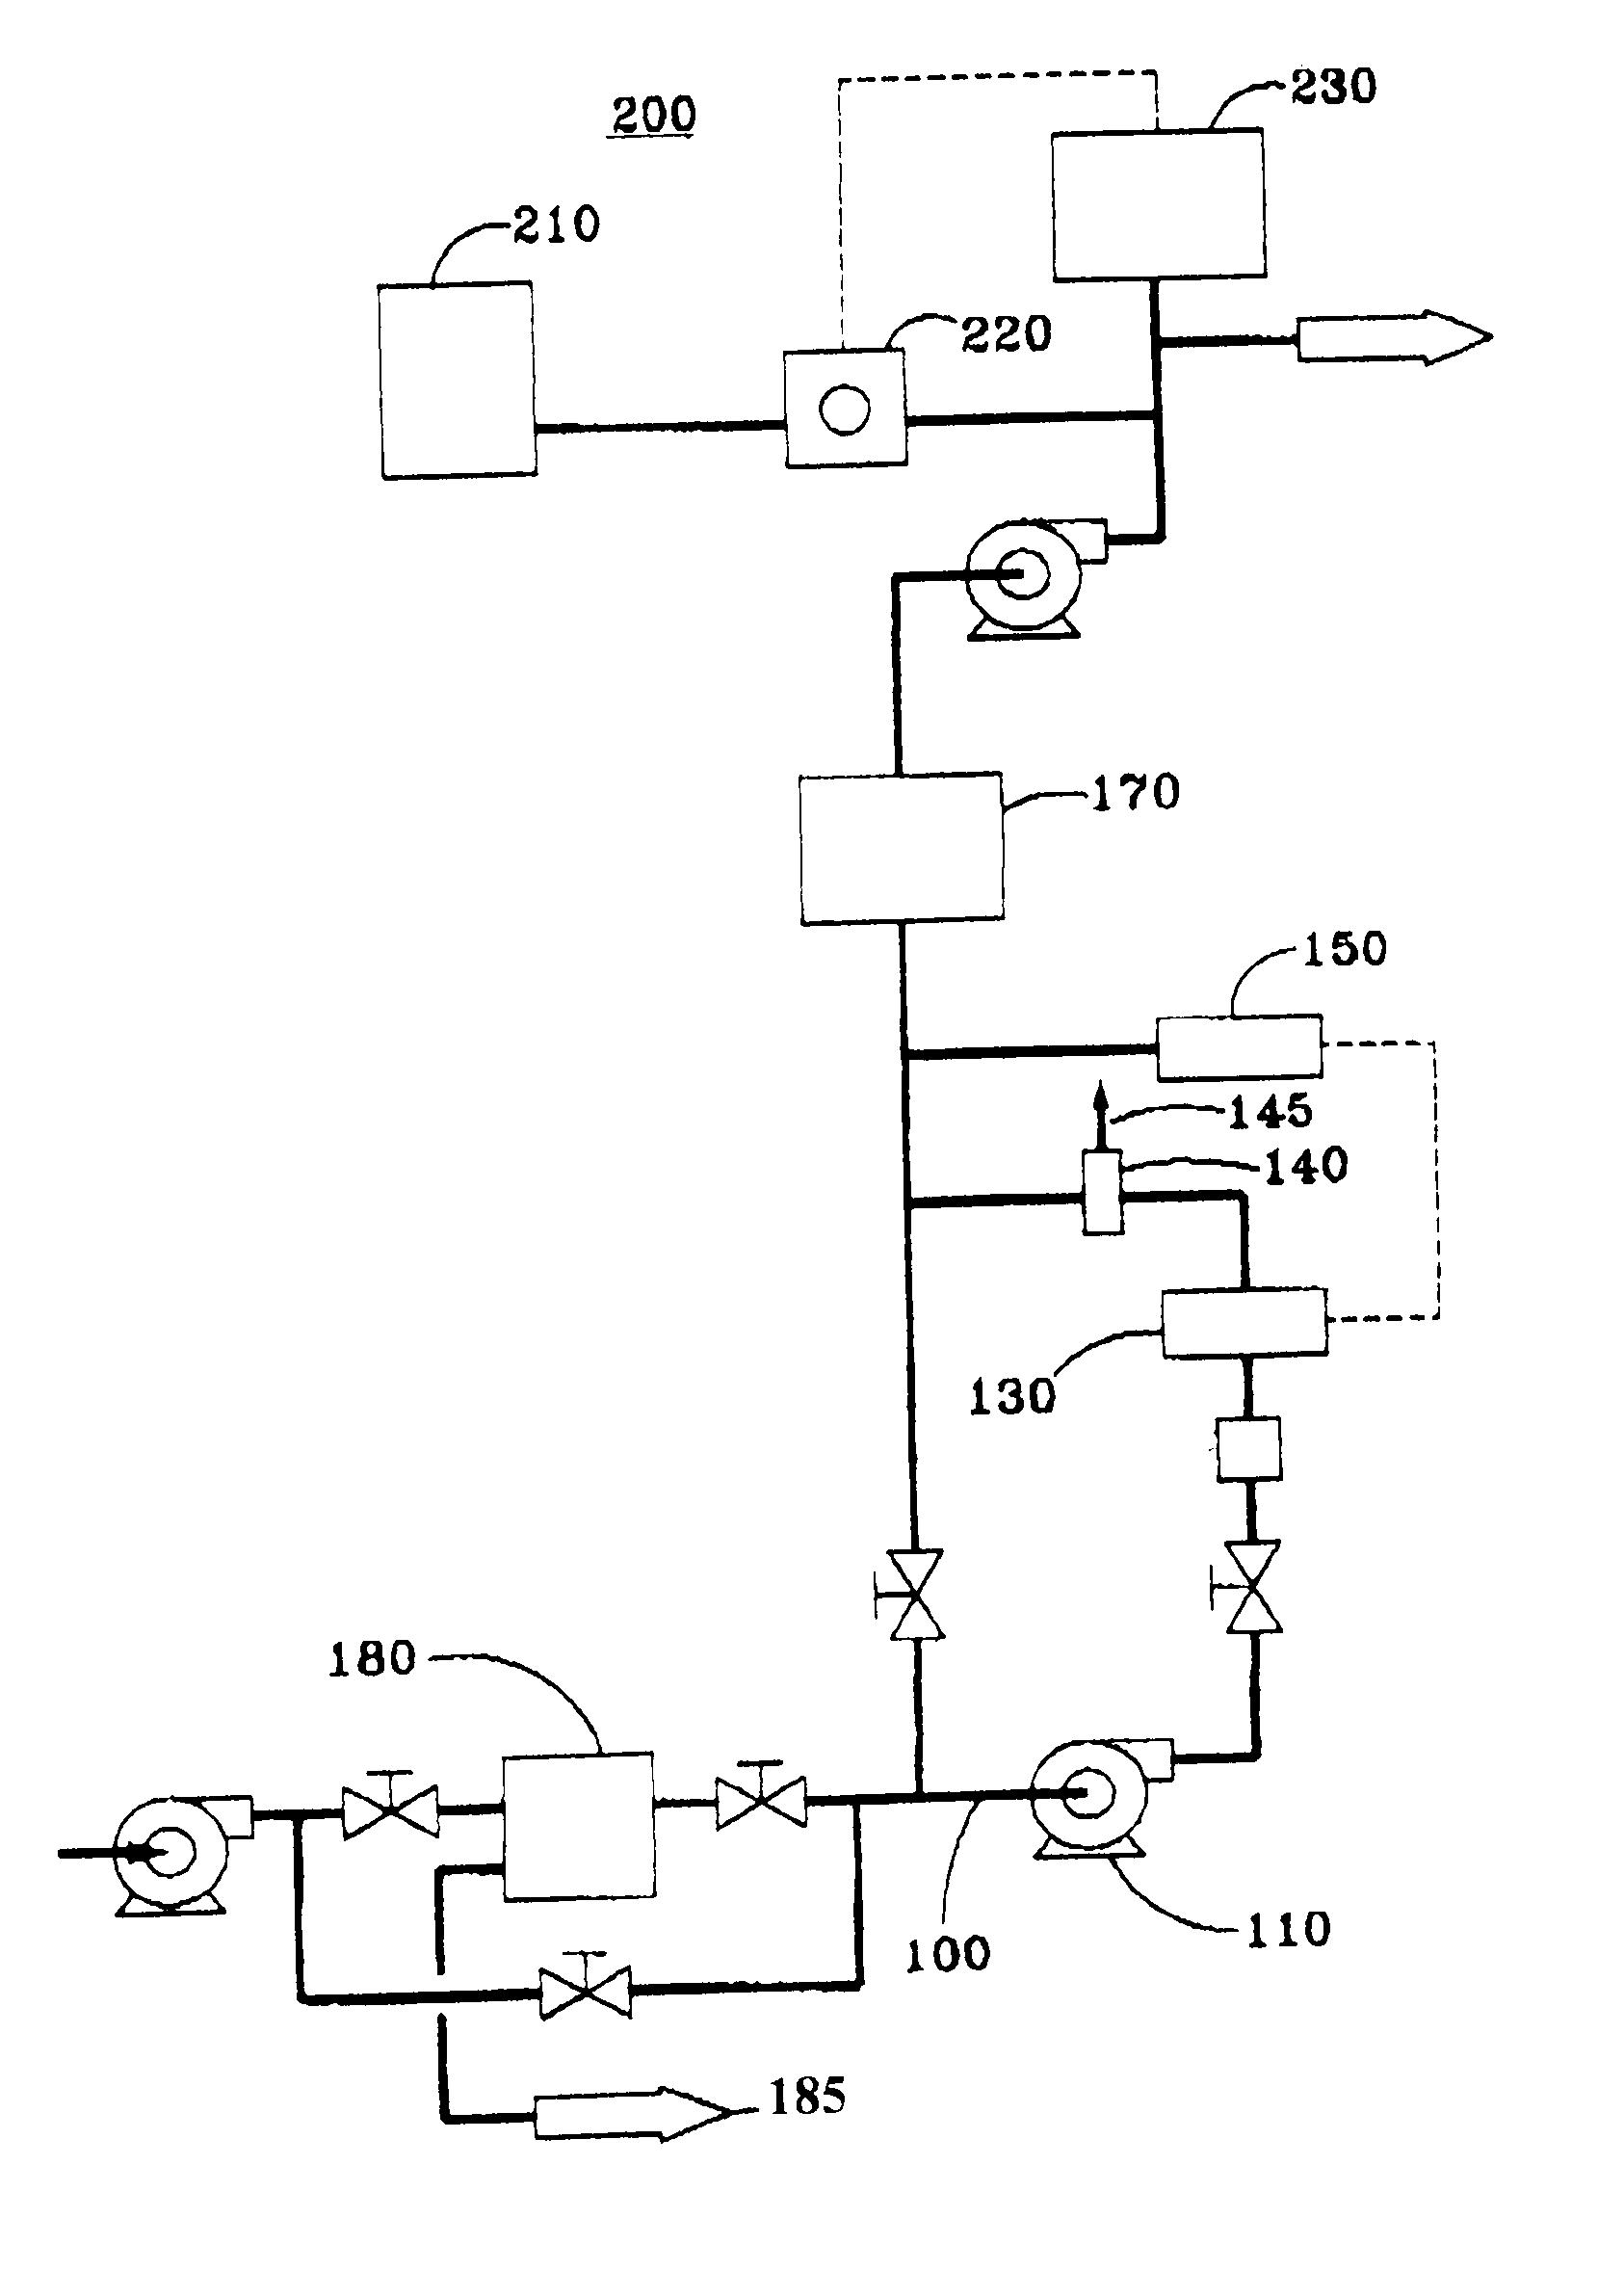 System and Process for Treating Ballast Water